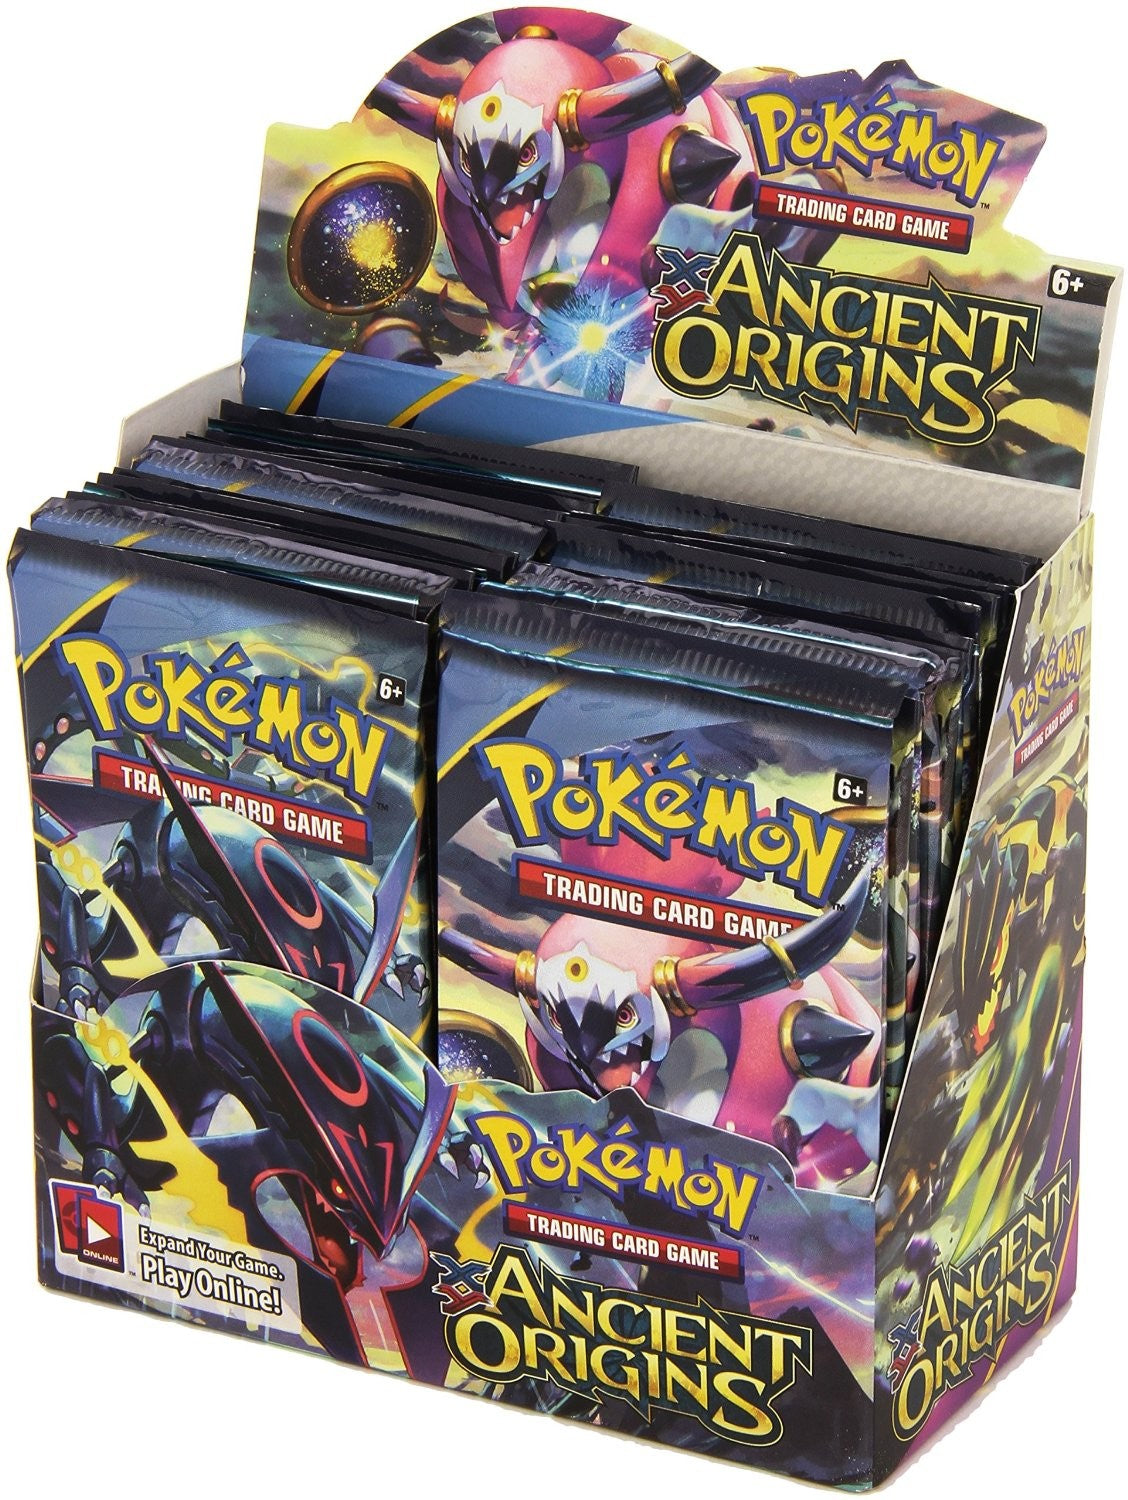 Pokémon Trading Card Game: XY Ancient Origins Sealed Booster Box - BigBoi Cards